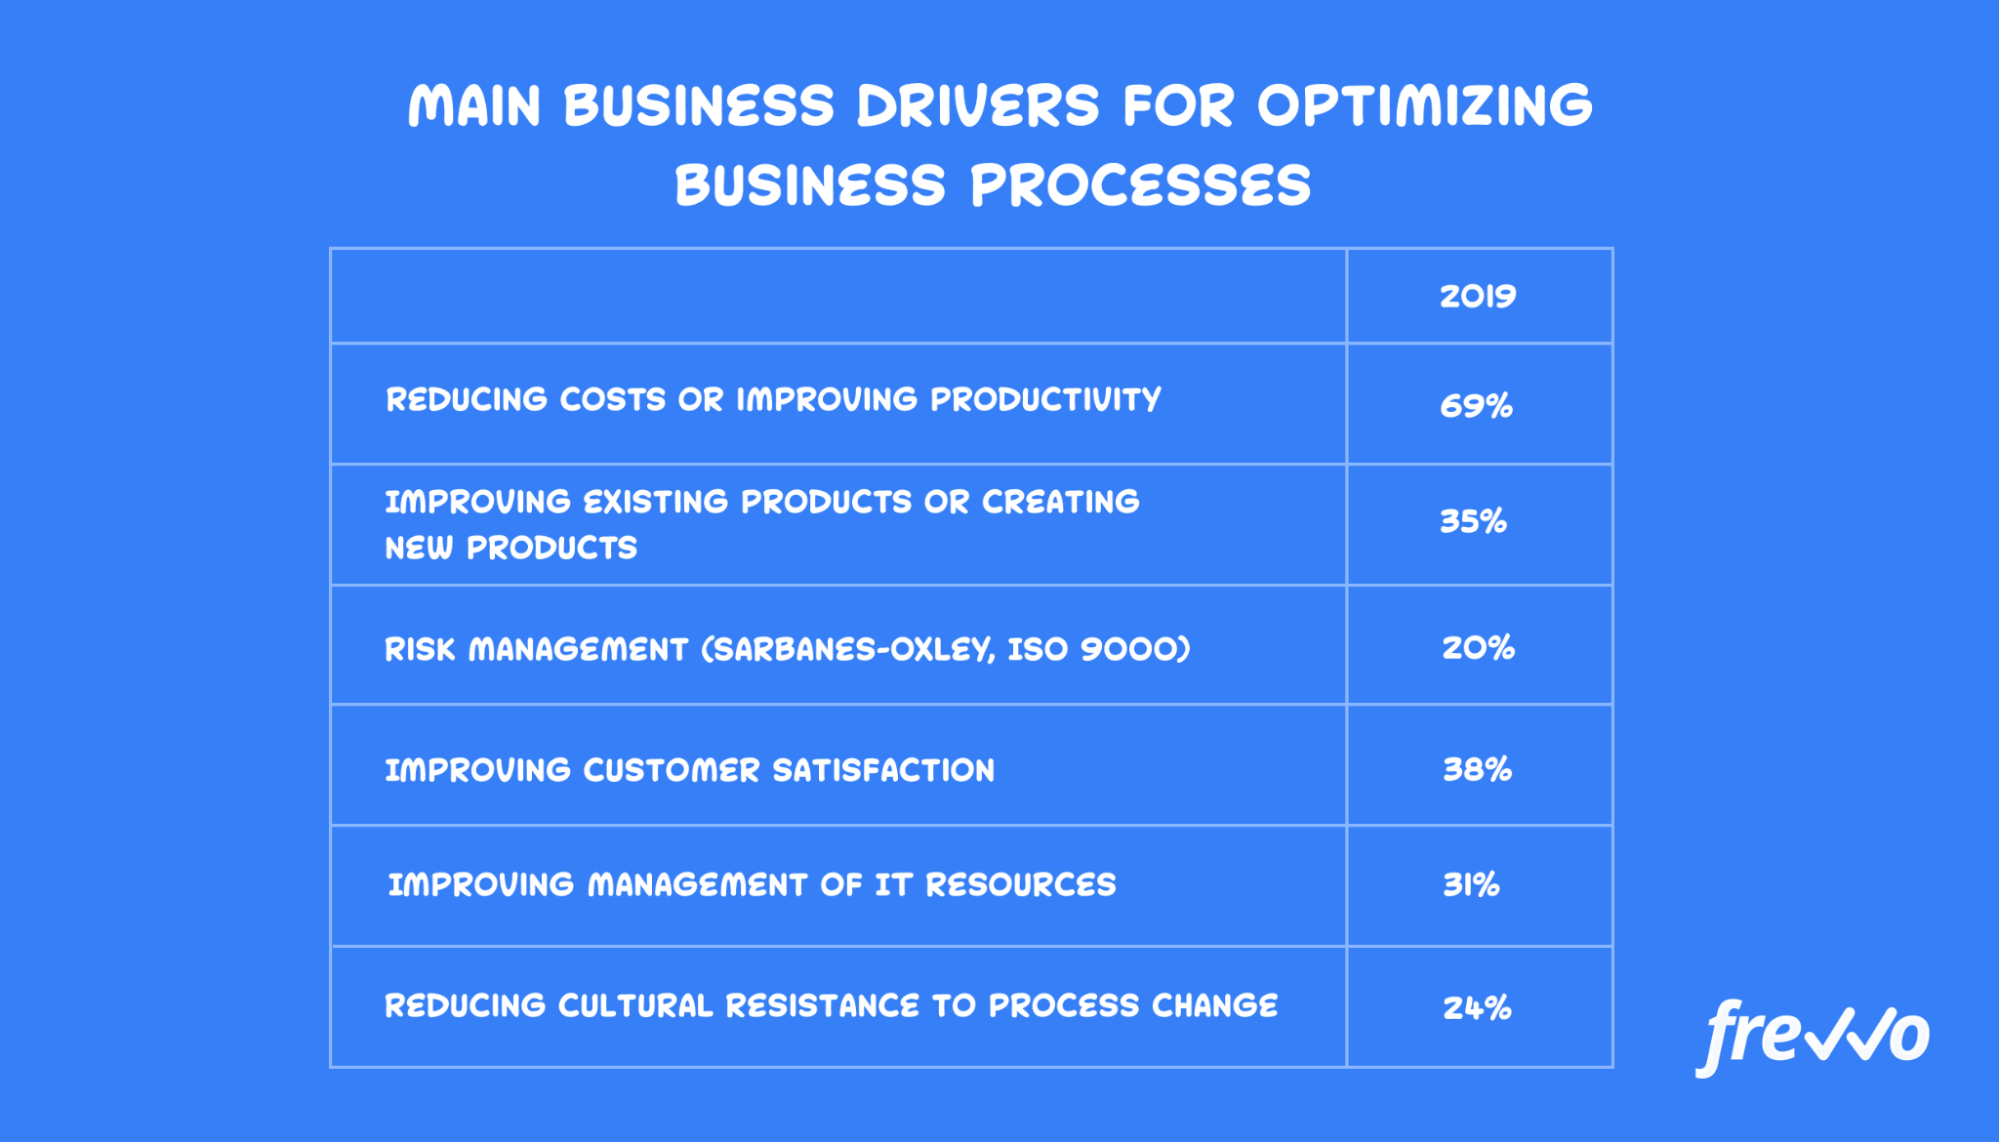 The main reasons for executives to optimize business processes